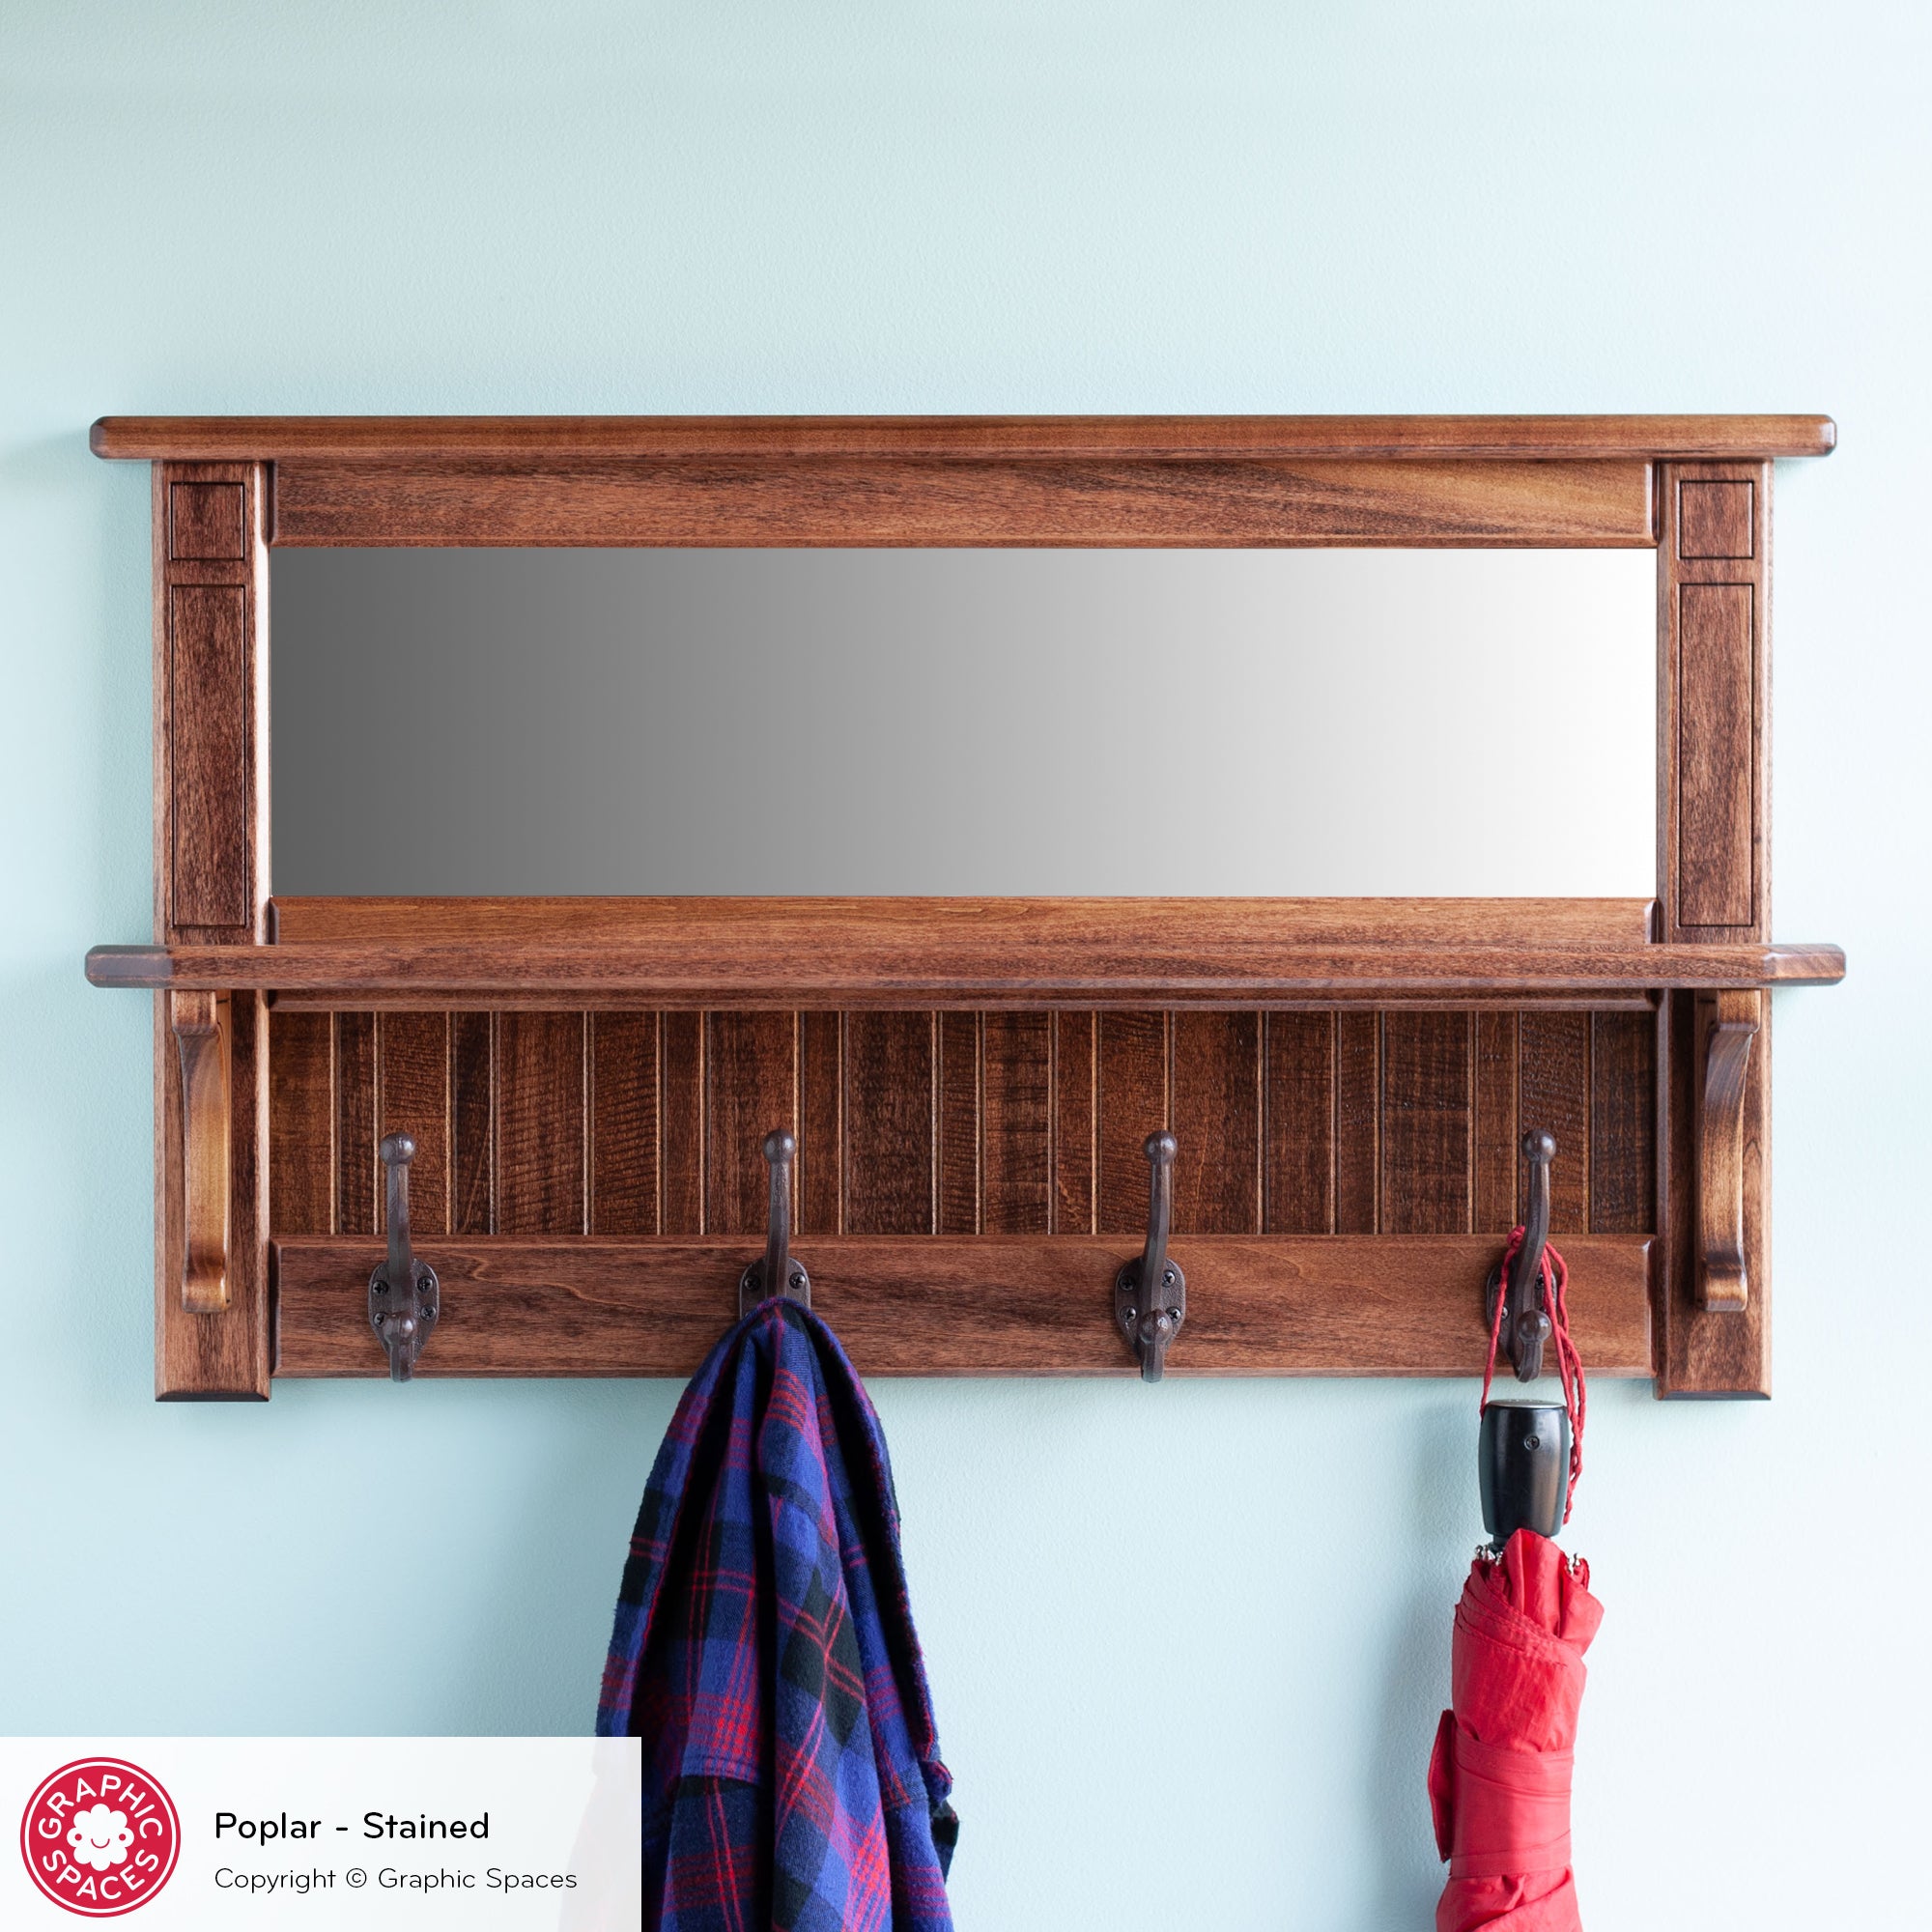 Wall Mirror Shelf & Coat Rack: FINISHED STAINED